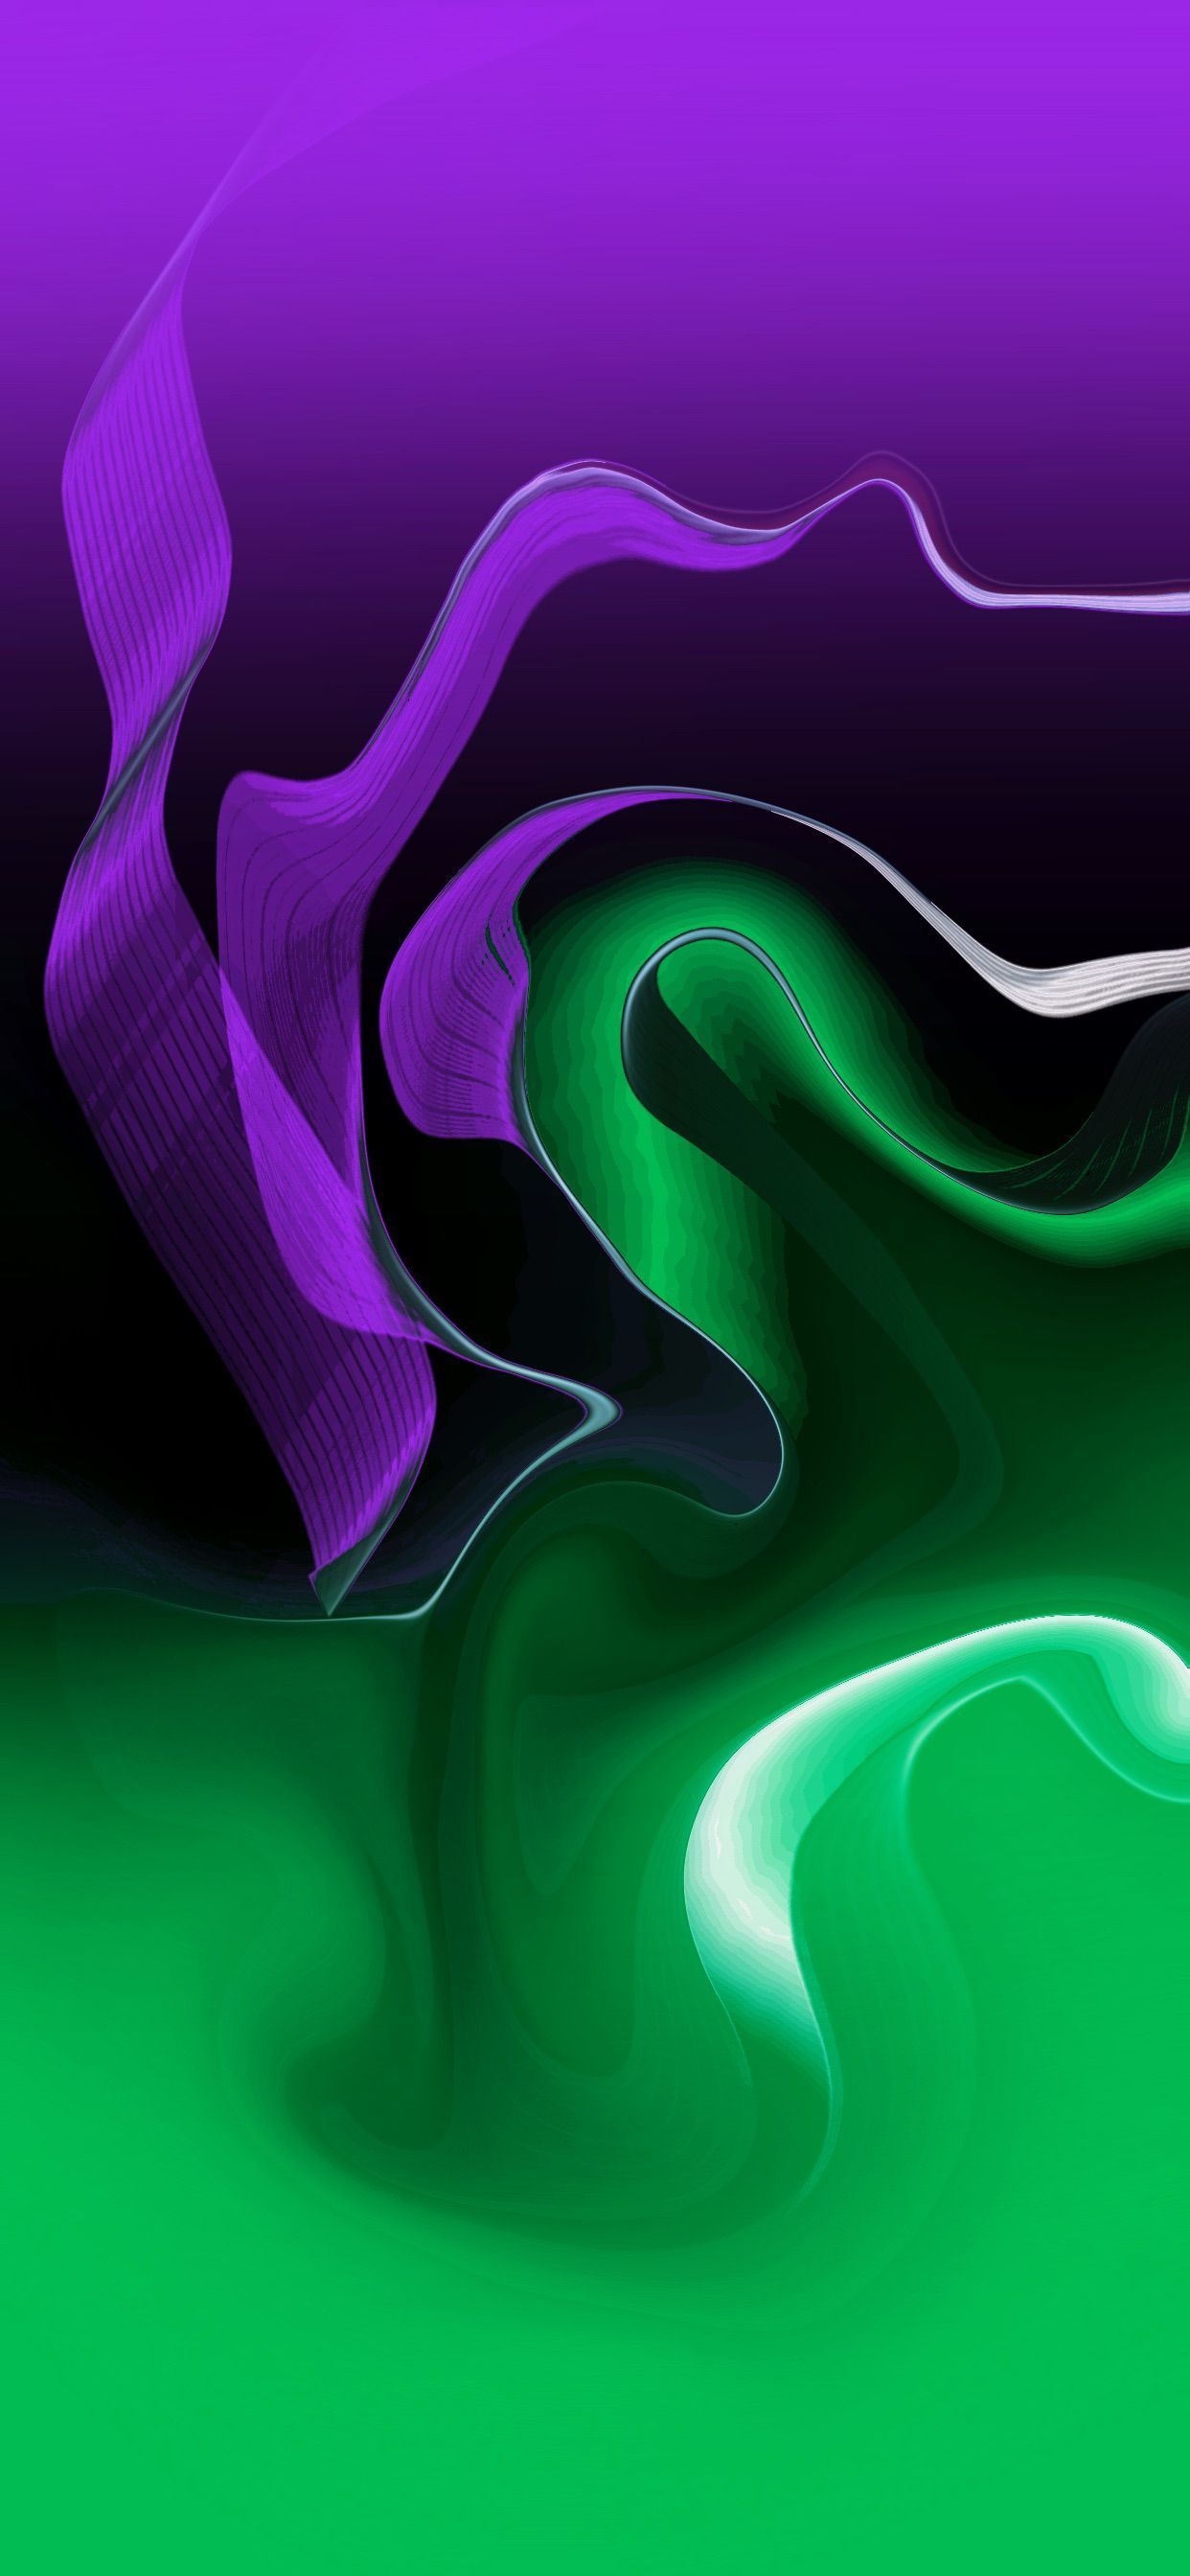 green and purple backgrounds